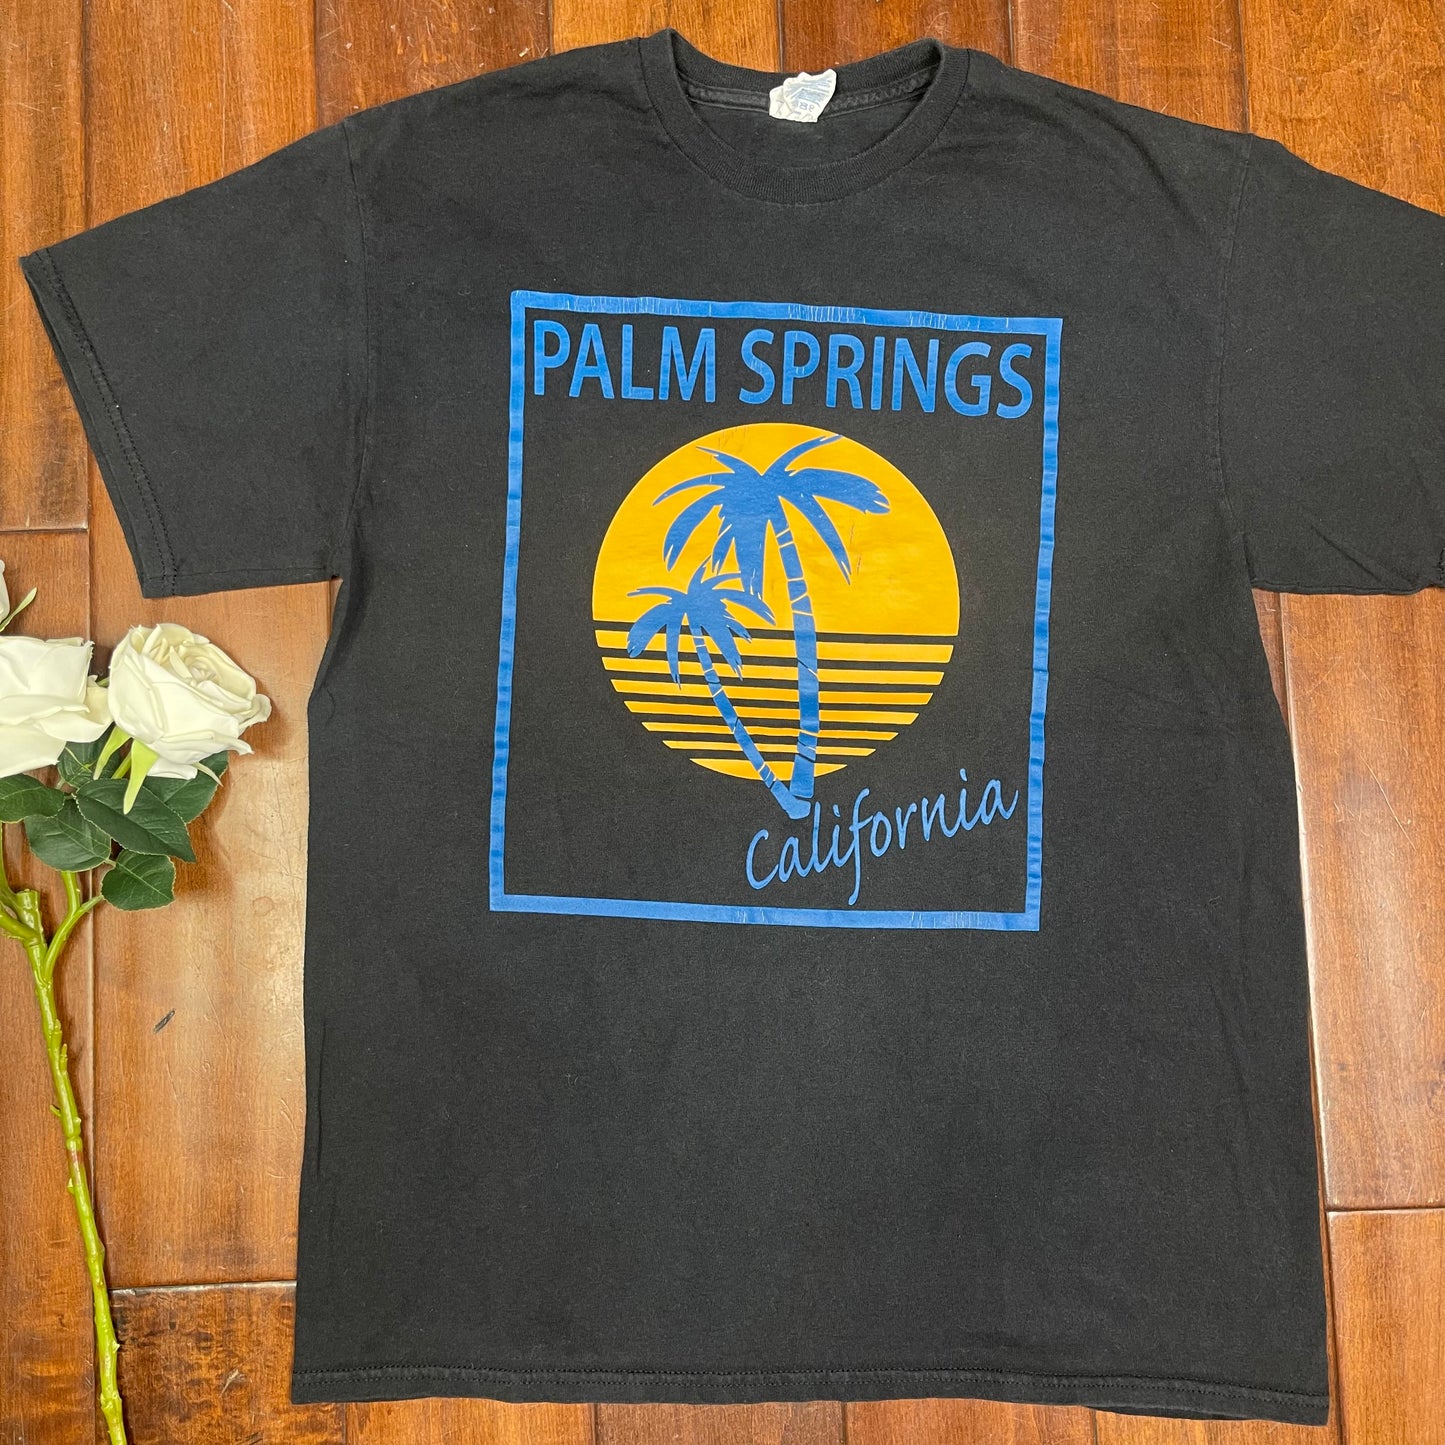 THRIFTED PALM SPRINGS RETRO STYLE T-SHIRT